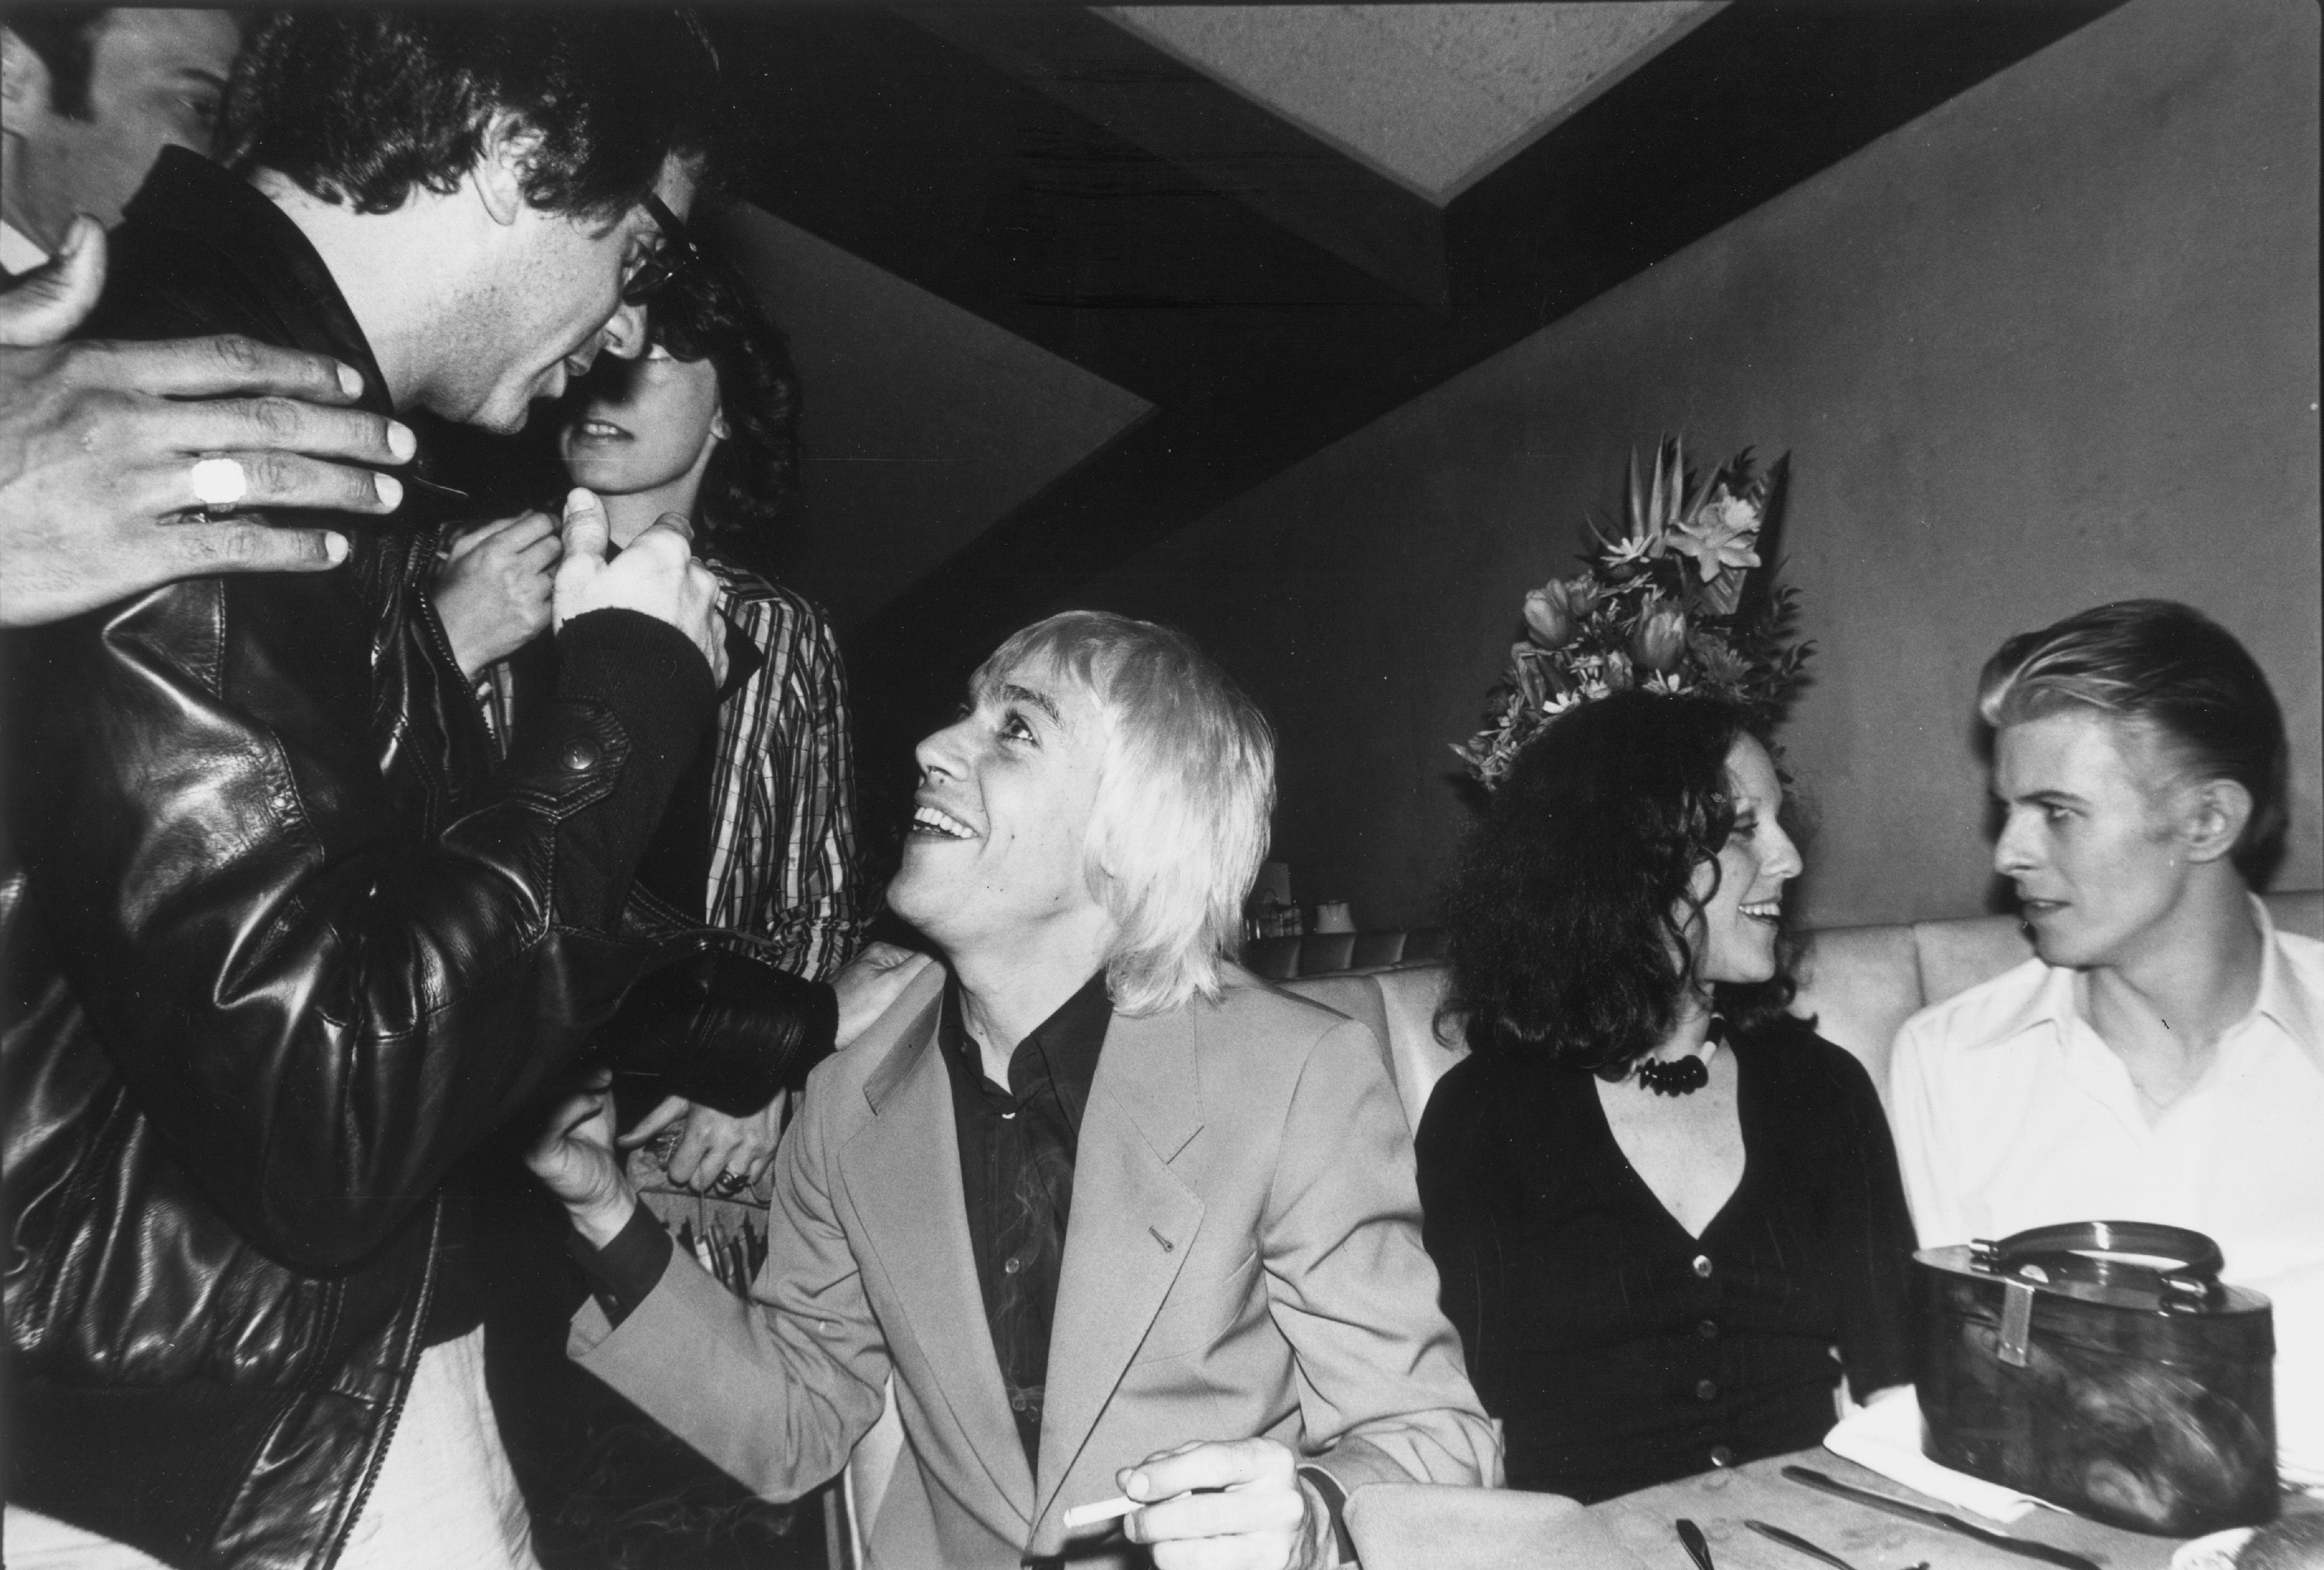 Danny Fields, with Iggy Pop, Lisa Robinson and David Bowie, via Danny Fields Archives